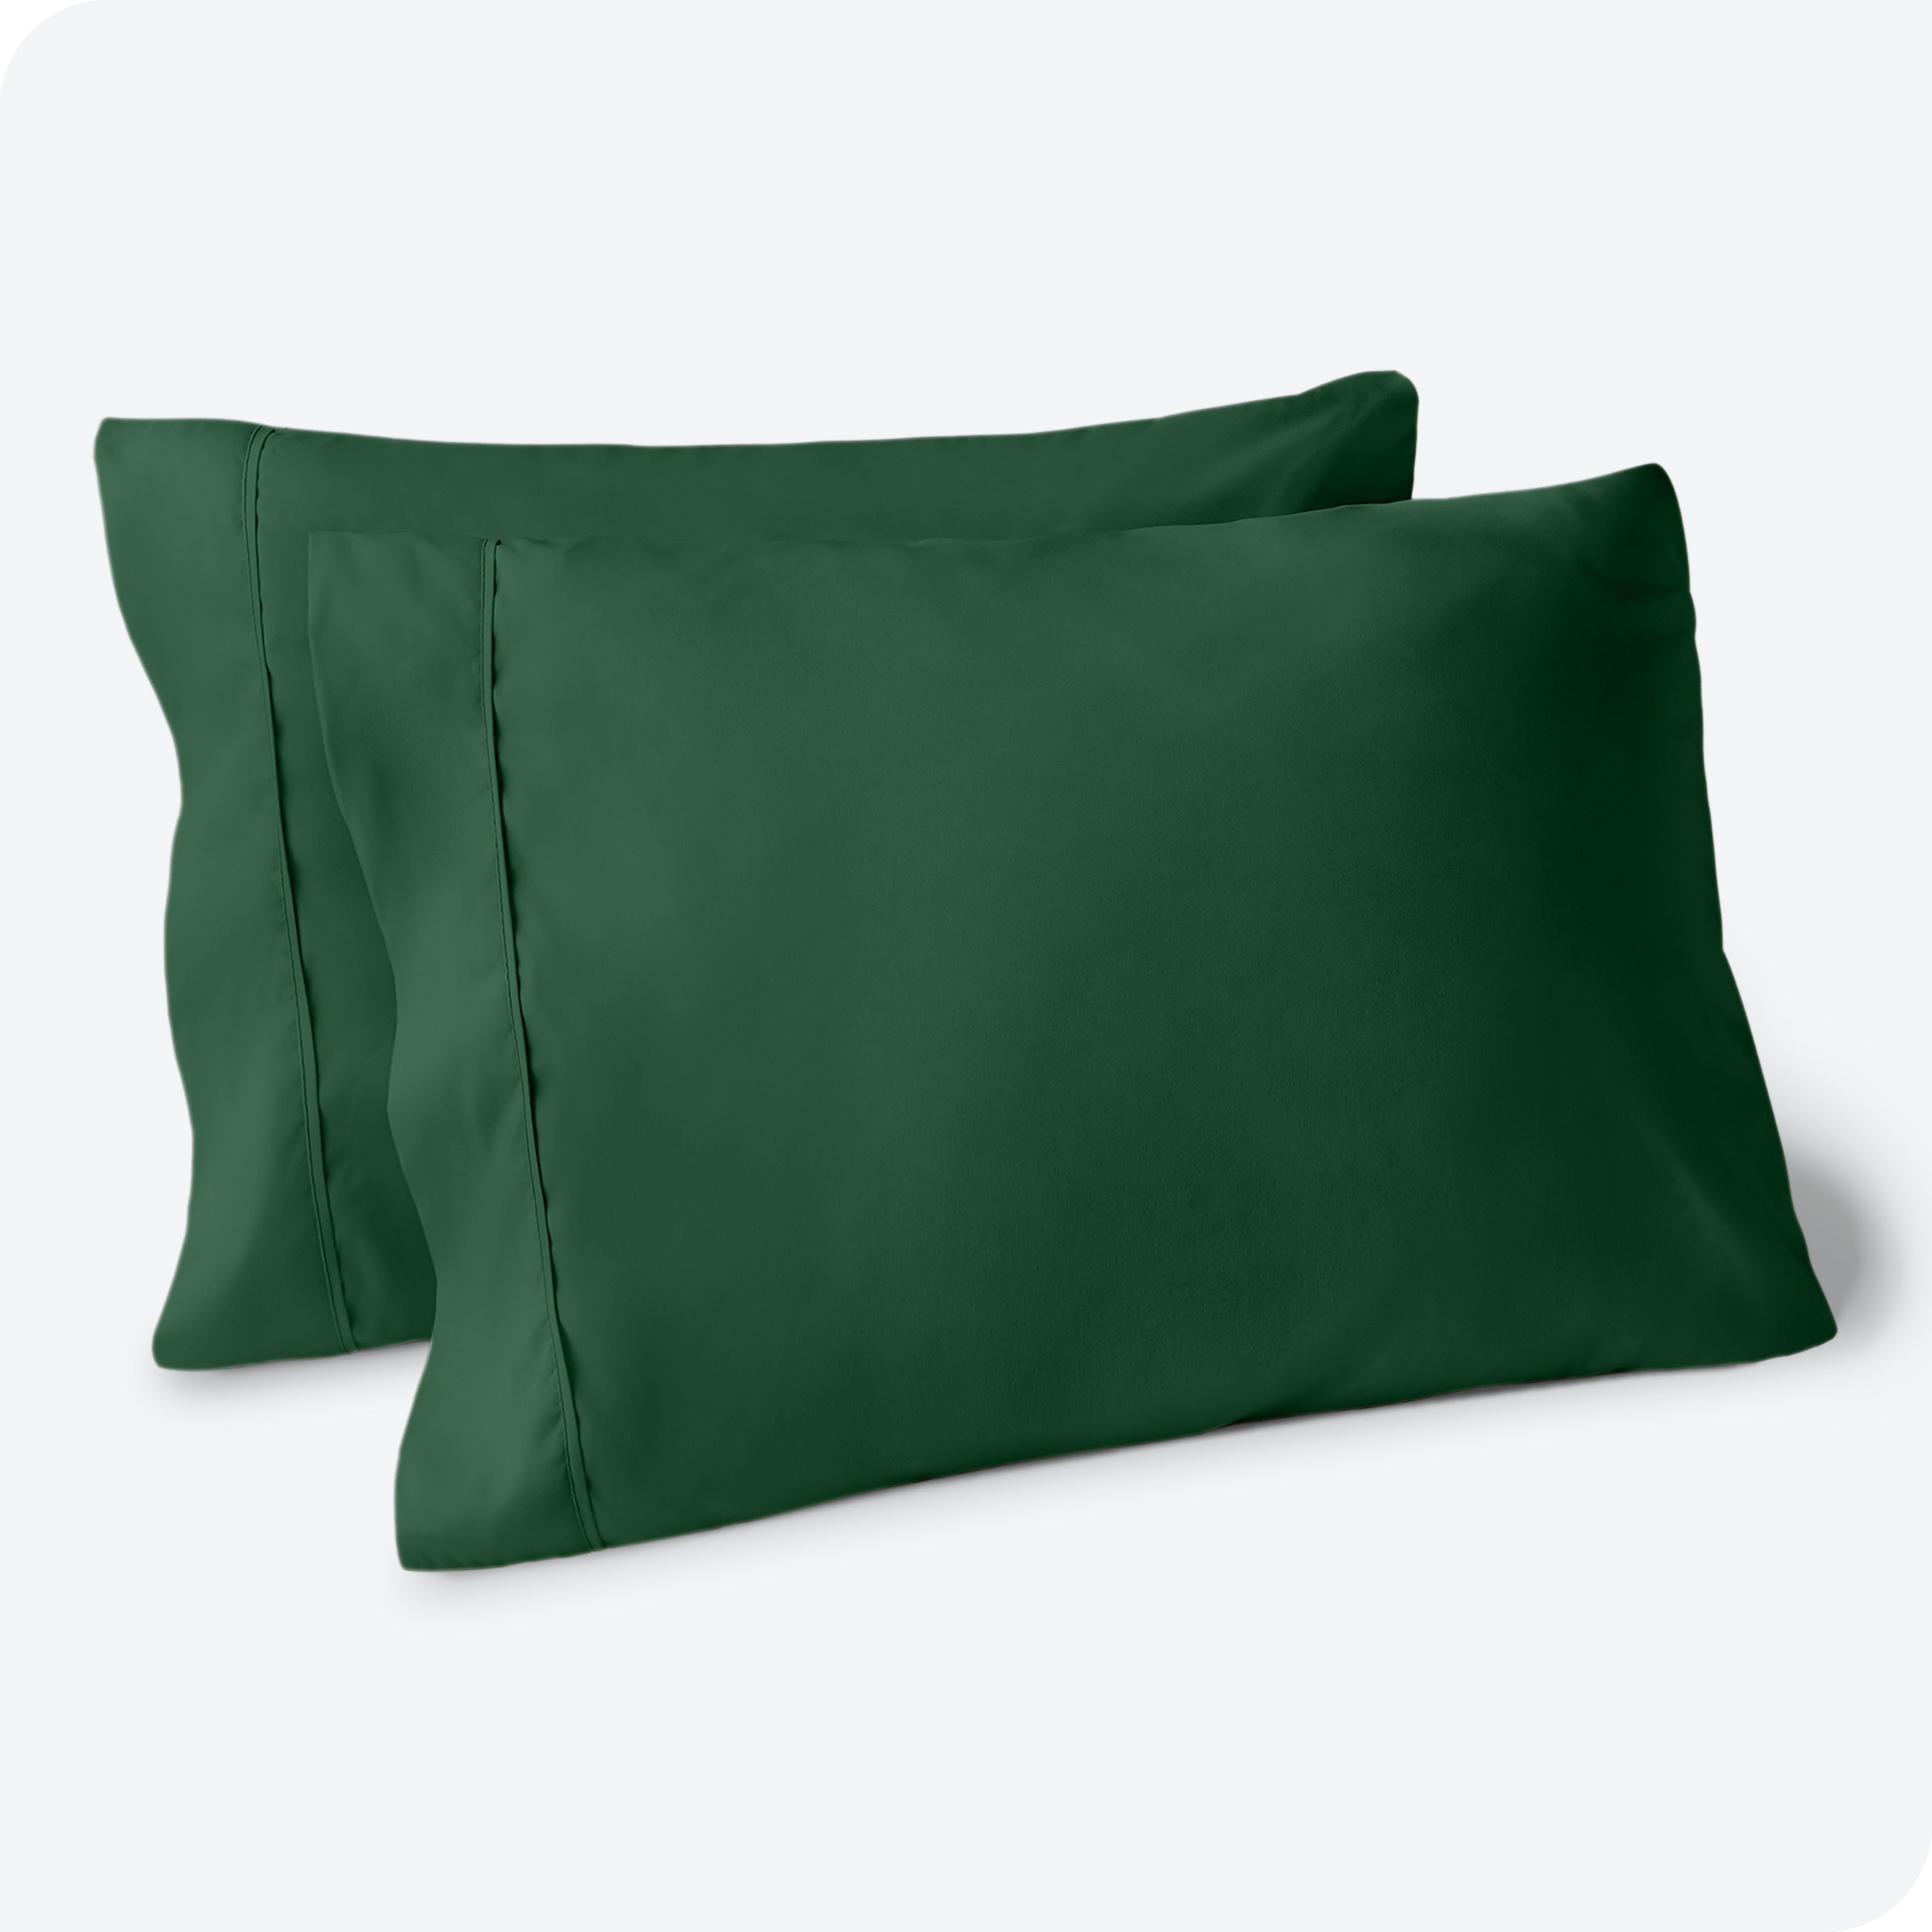 Two pillows on a white background with green pillowcases on them